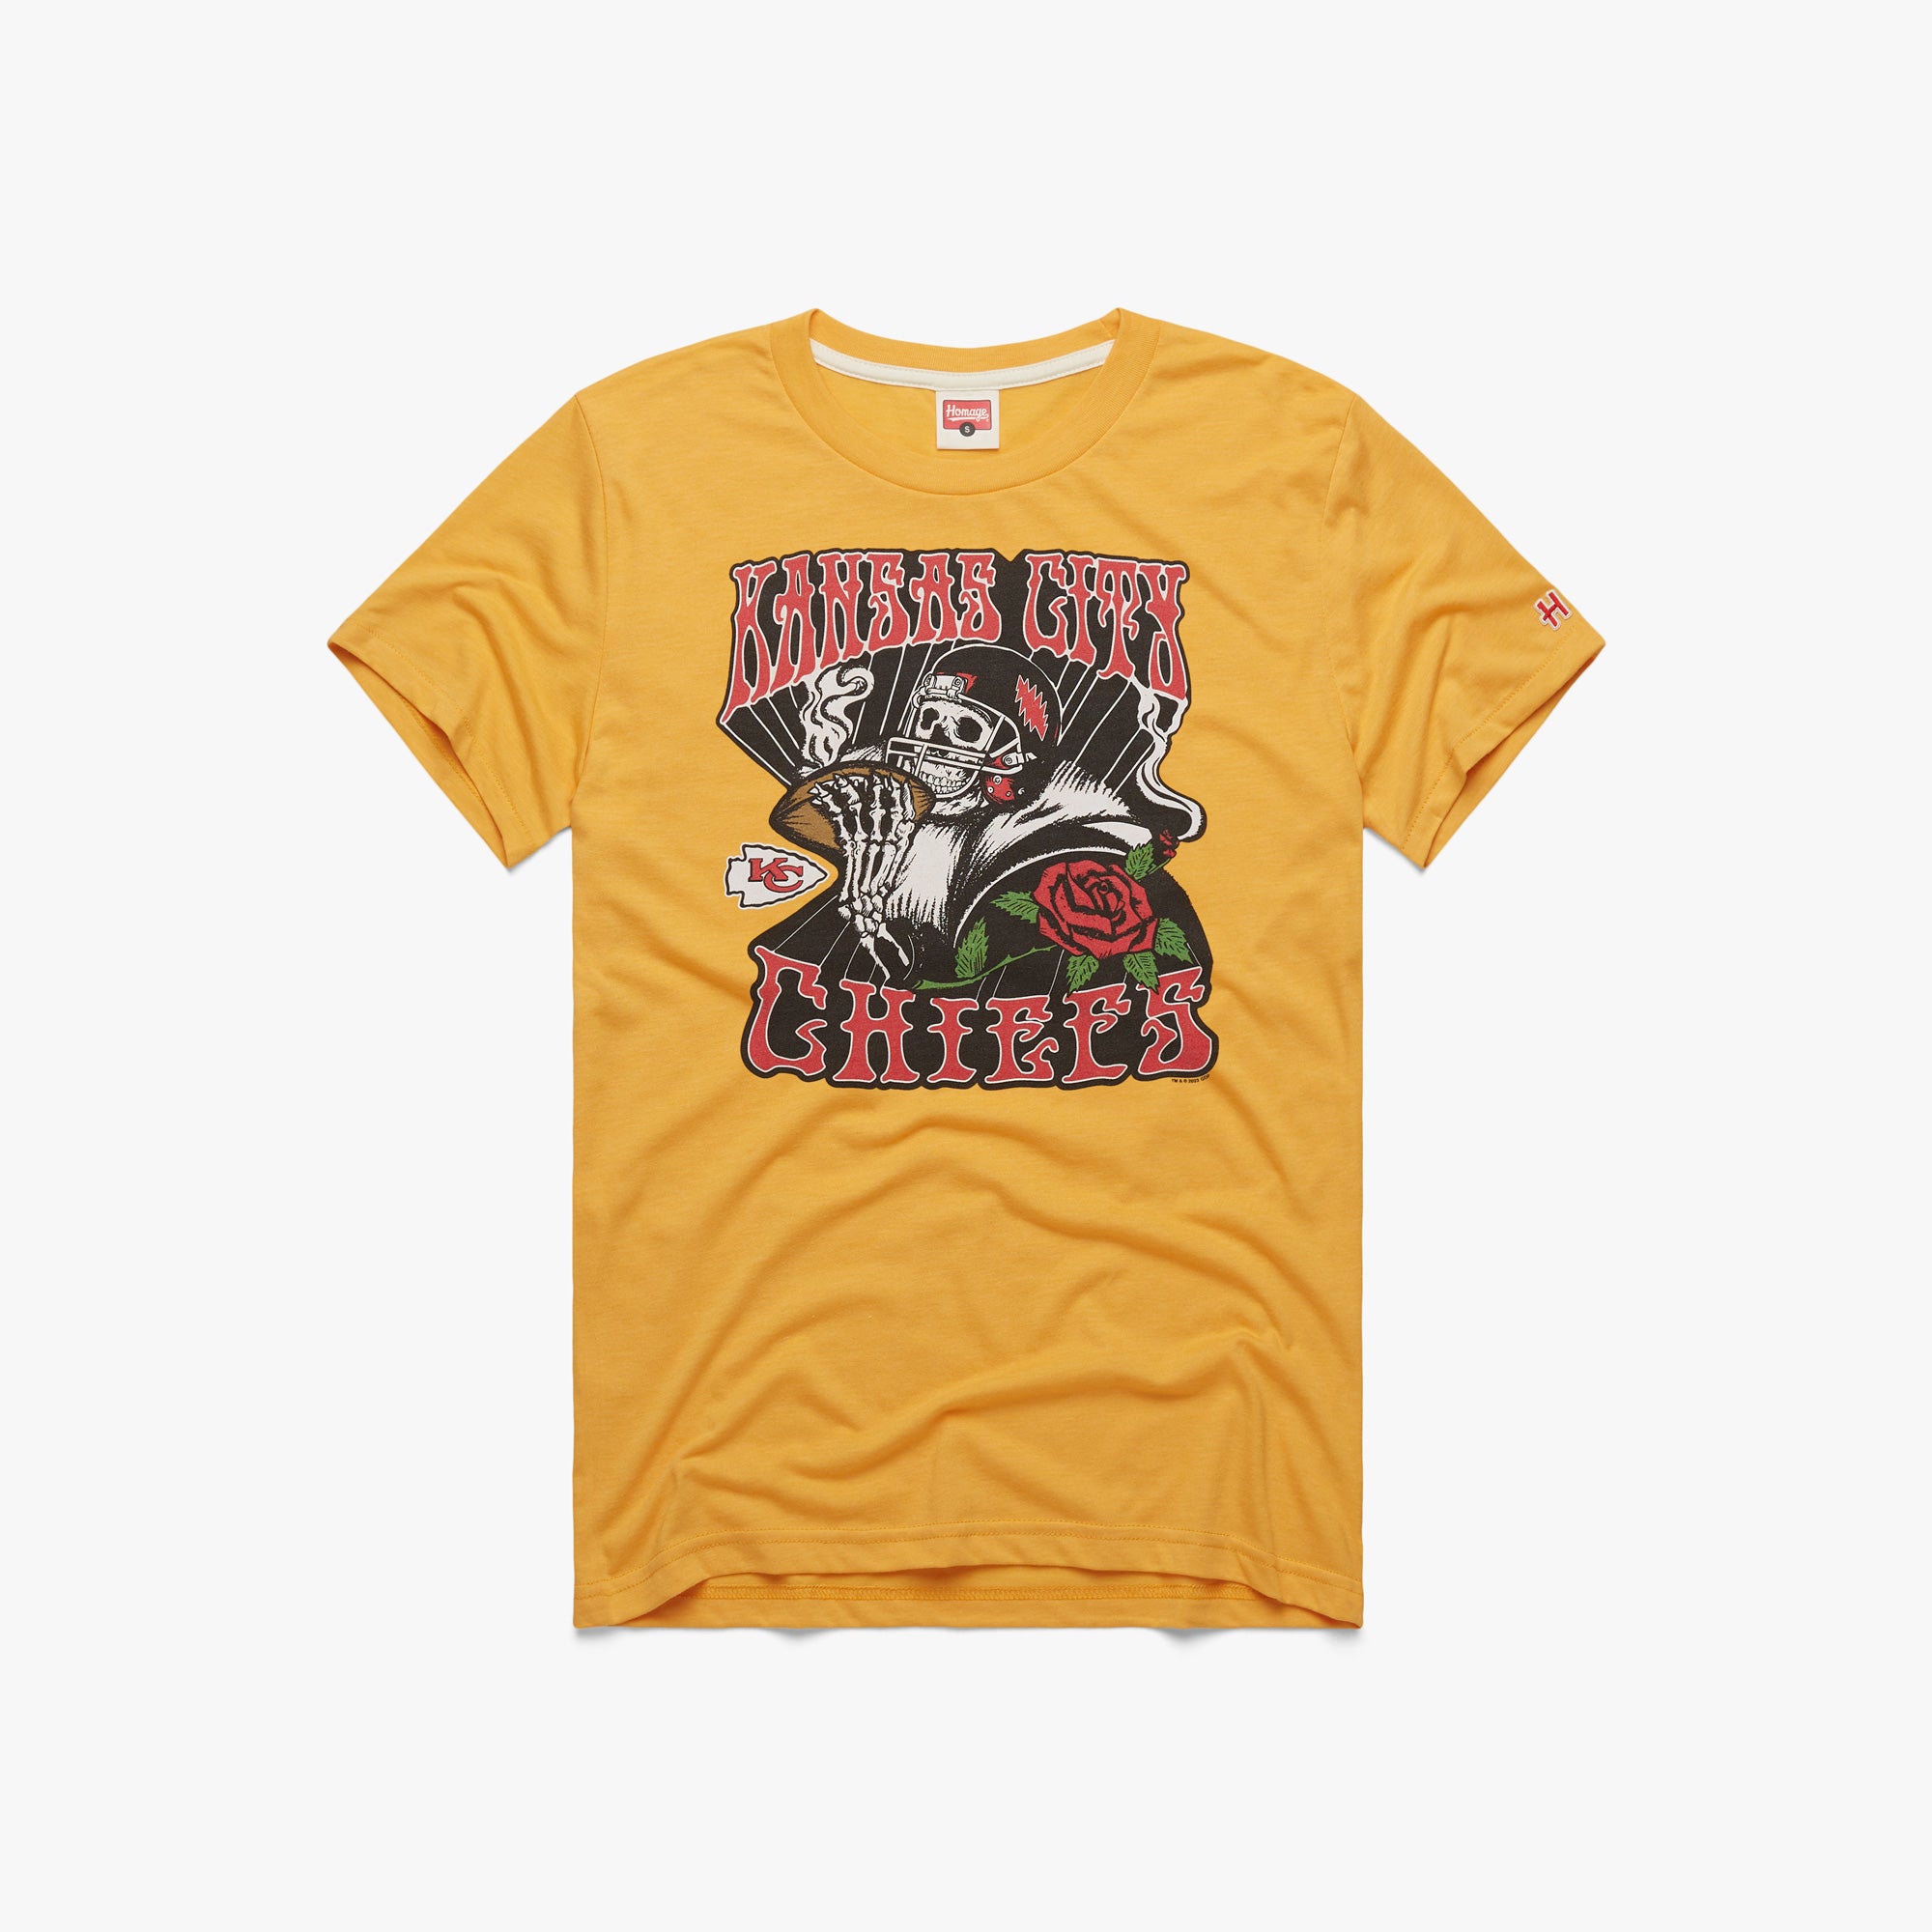 NFL x Grateful Dead x Kansas City Chiefs T-Shirt from Homage. | Officially Licensed Vintage NFL Apparel from Homage Pro Shop.